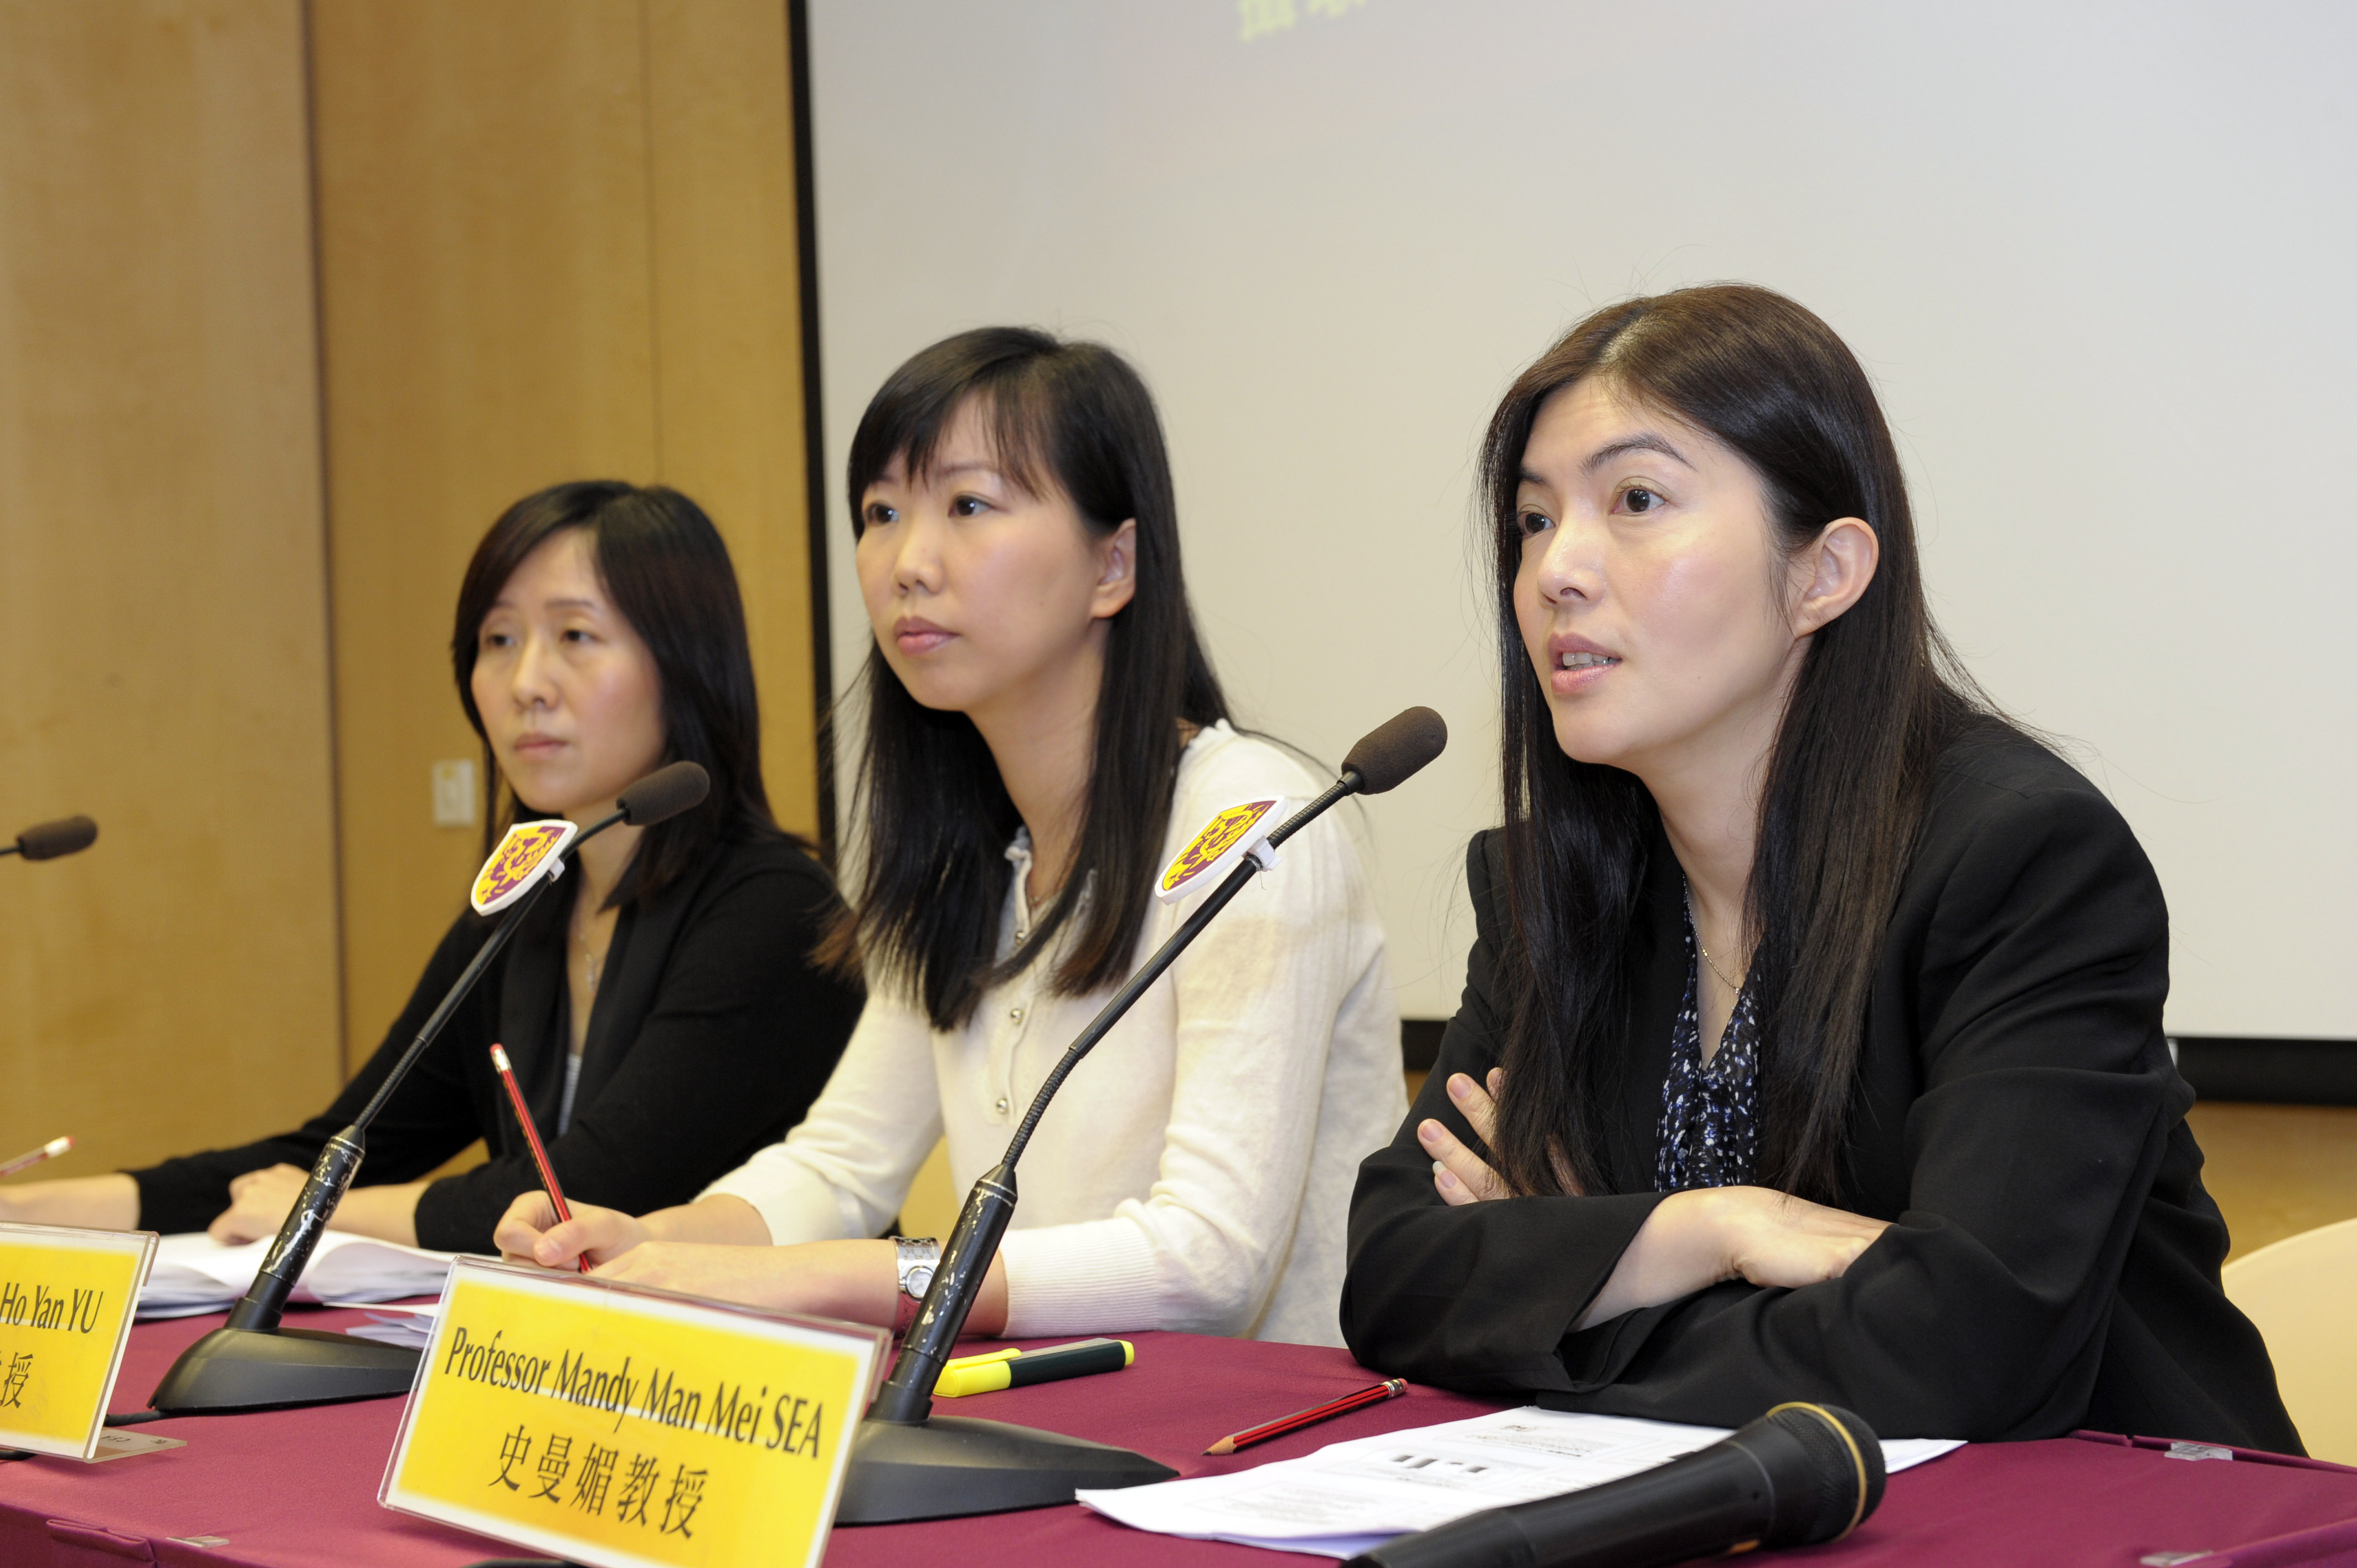 Prof. SEA Man Mei Mandy (right 1st), Assistant Professor (by Courtesy), Department of Medicine and Therapeutics, and Centre Manager, Centre for Nutritional Studies, CUHK expresses that Hong Kong people have excessive salt intake of 10g per day in average, far exceeding the maximum daily intake of 5g per day proposed by the World Health Organisation (WHO)